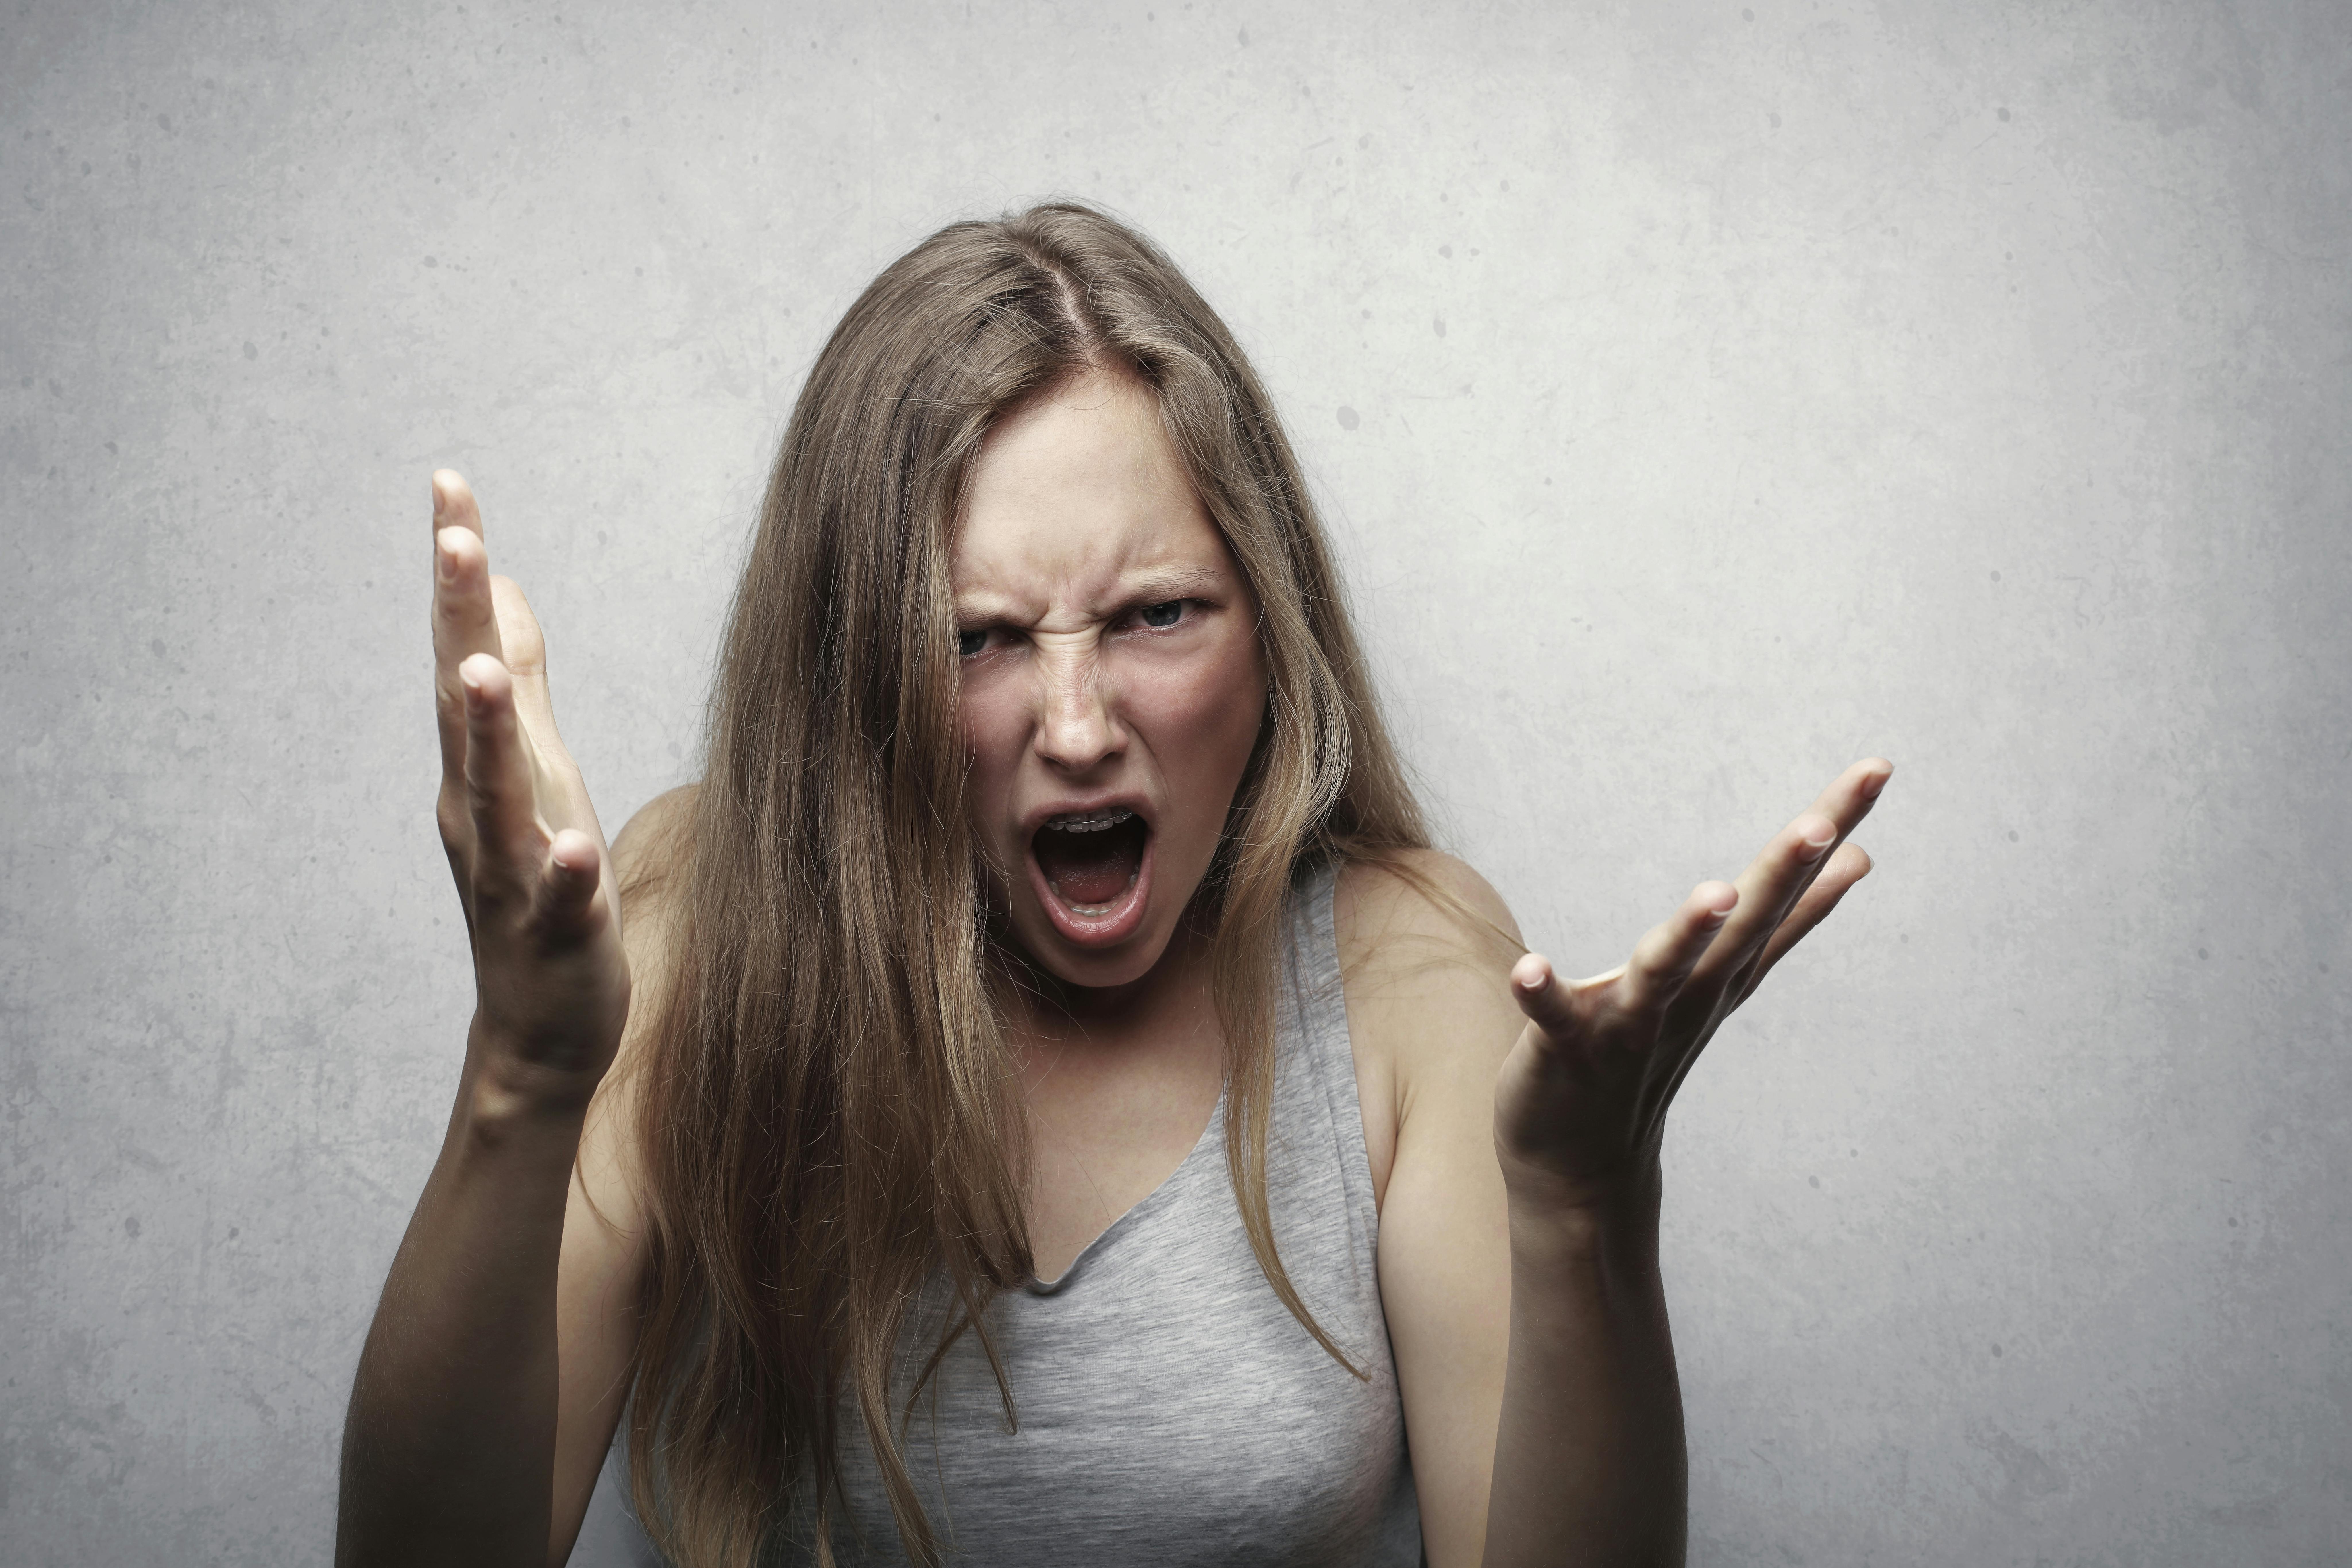 An angry young woman | Source: Pexels